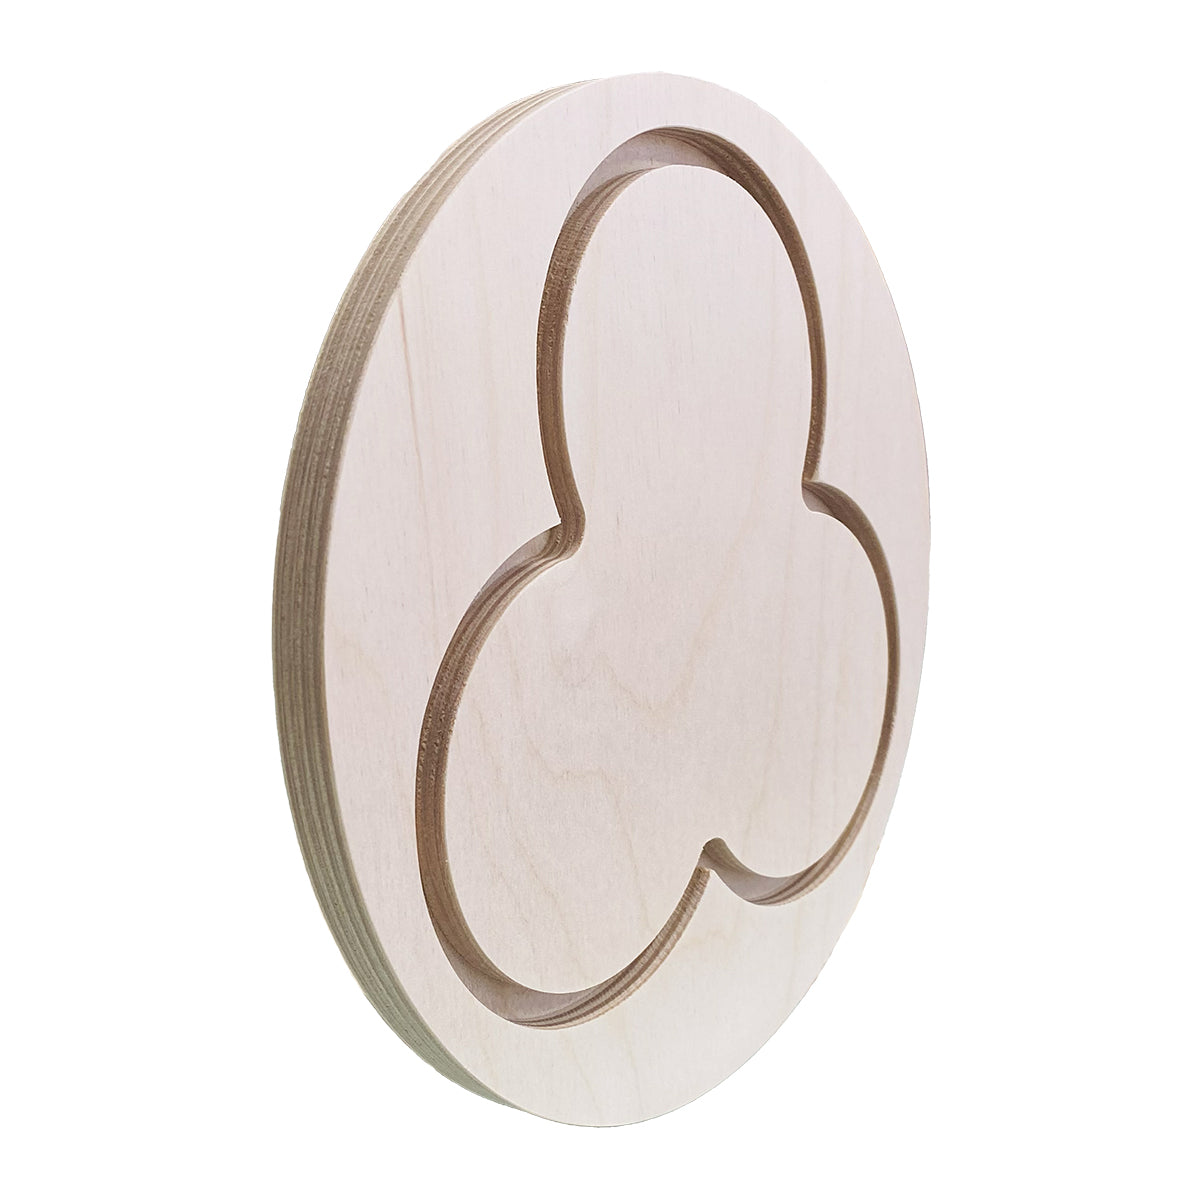 Trekell Gothic Rounded Trefoil Floater Panel - Wooden Painting Canvas - Trekell Art Supplies